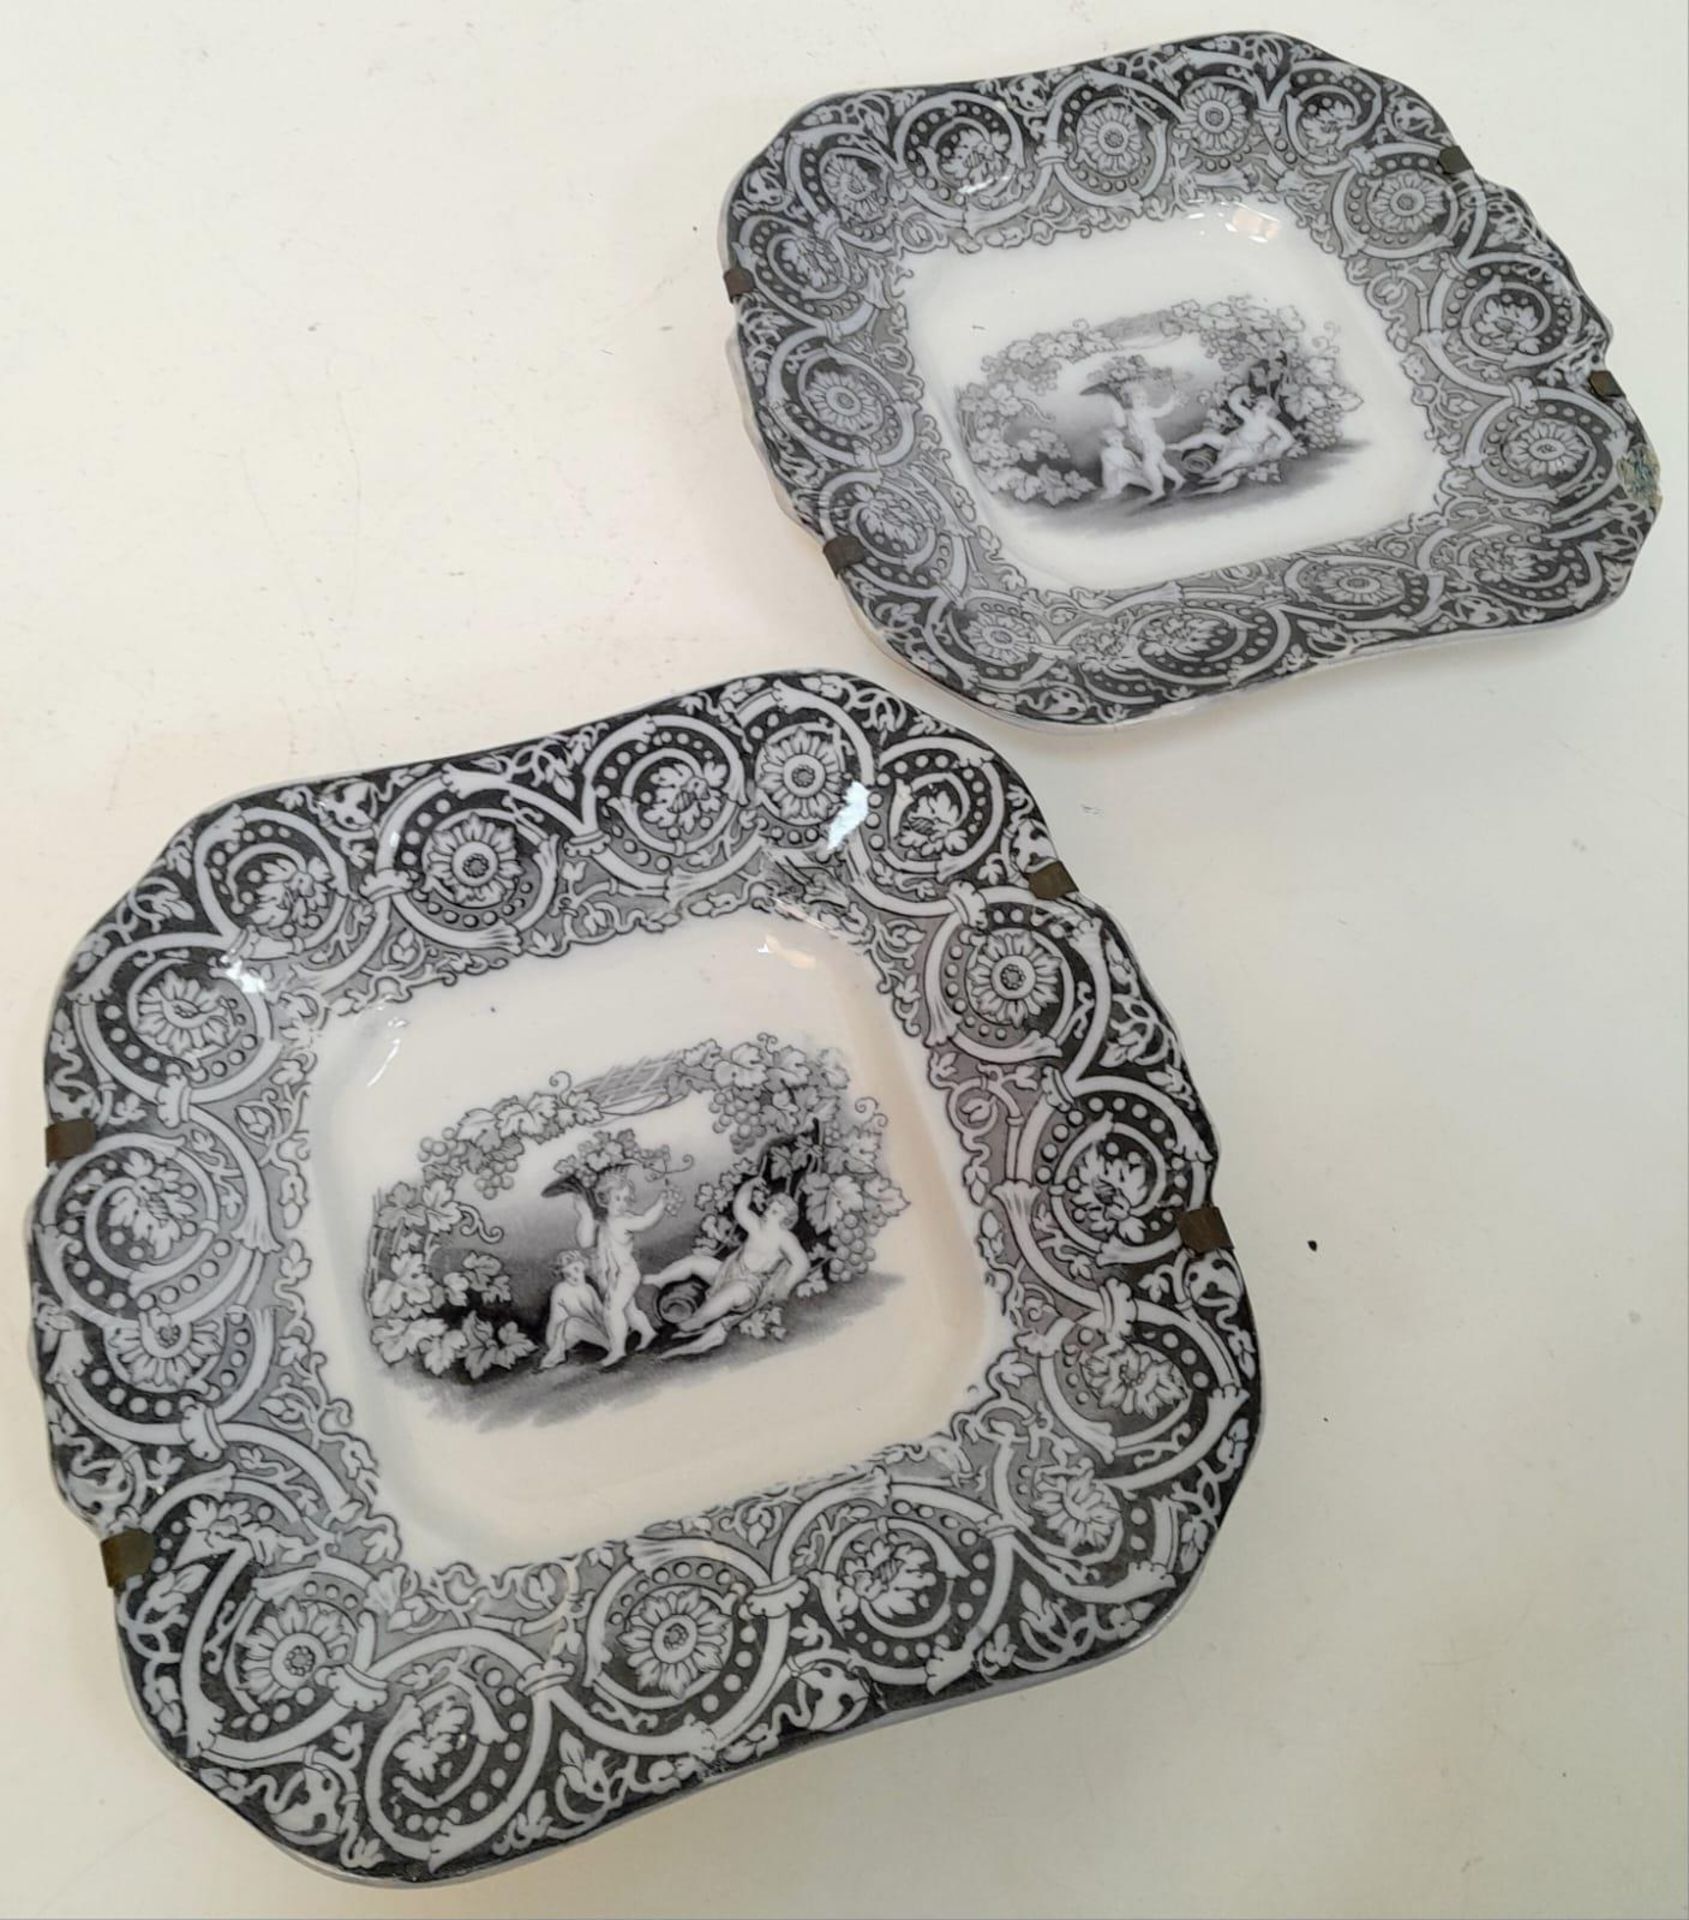 Two British IONIA antique hanging wall plates of rectangular shape, BY J & MP Bell & Co.